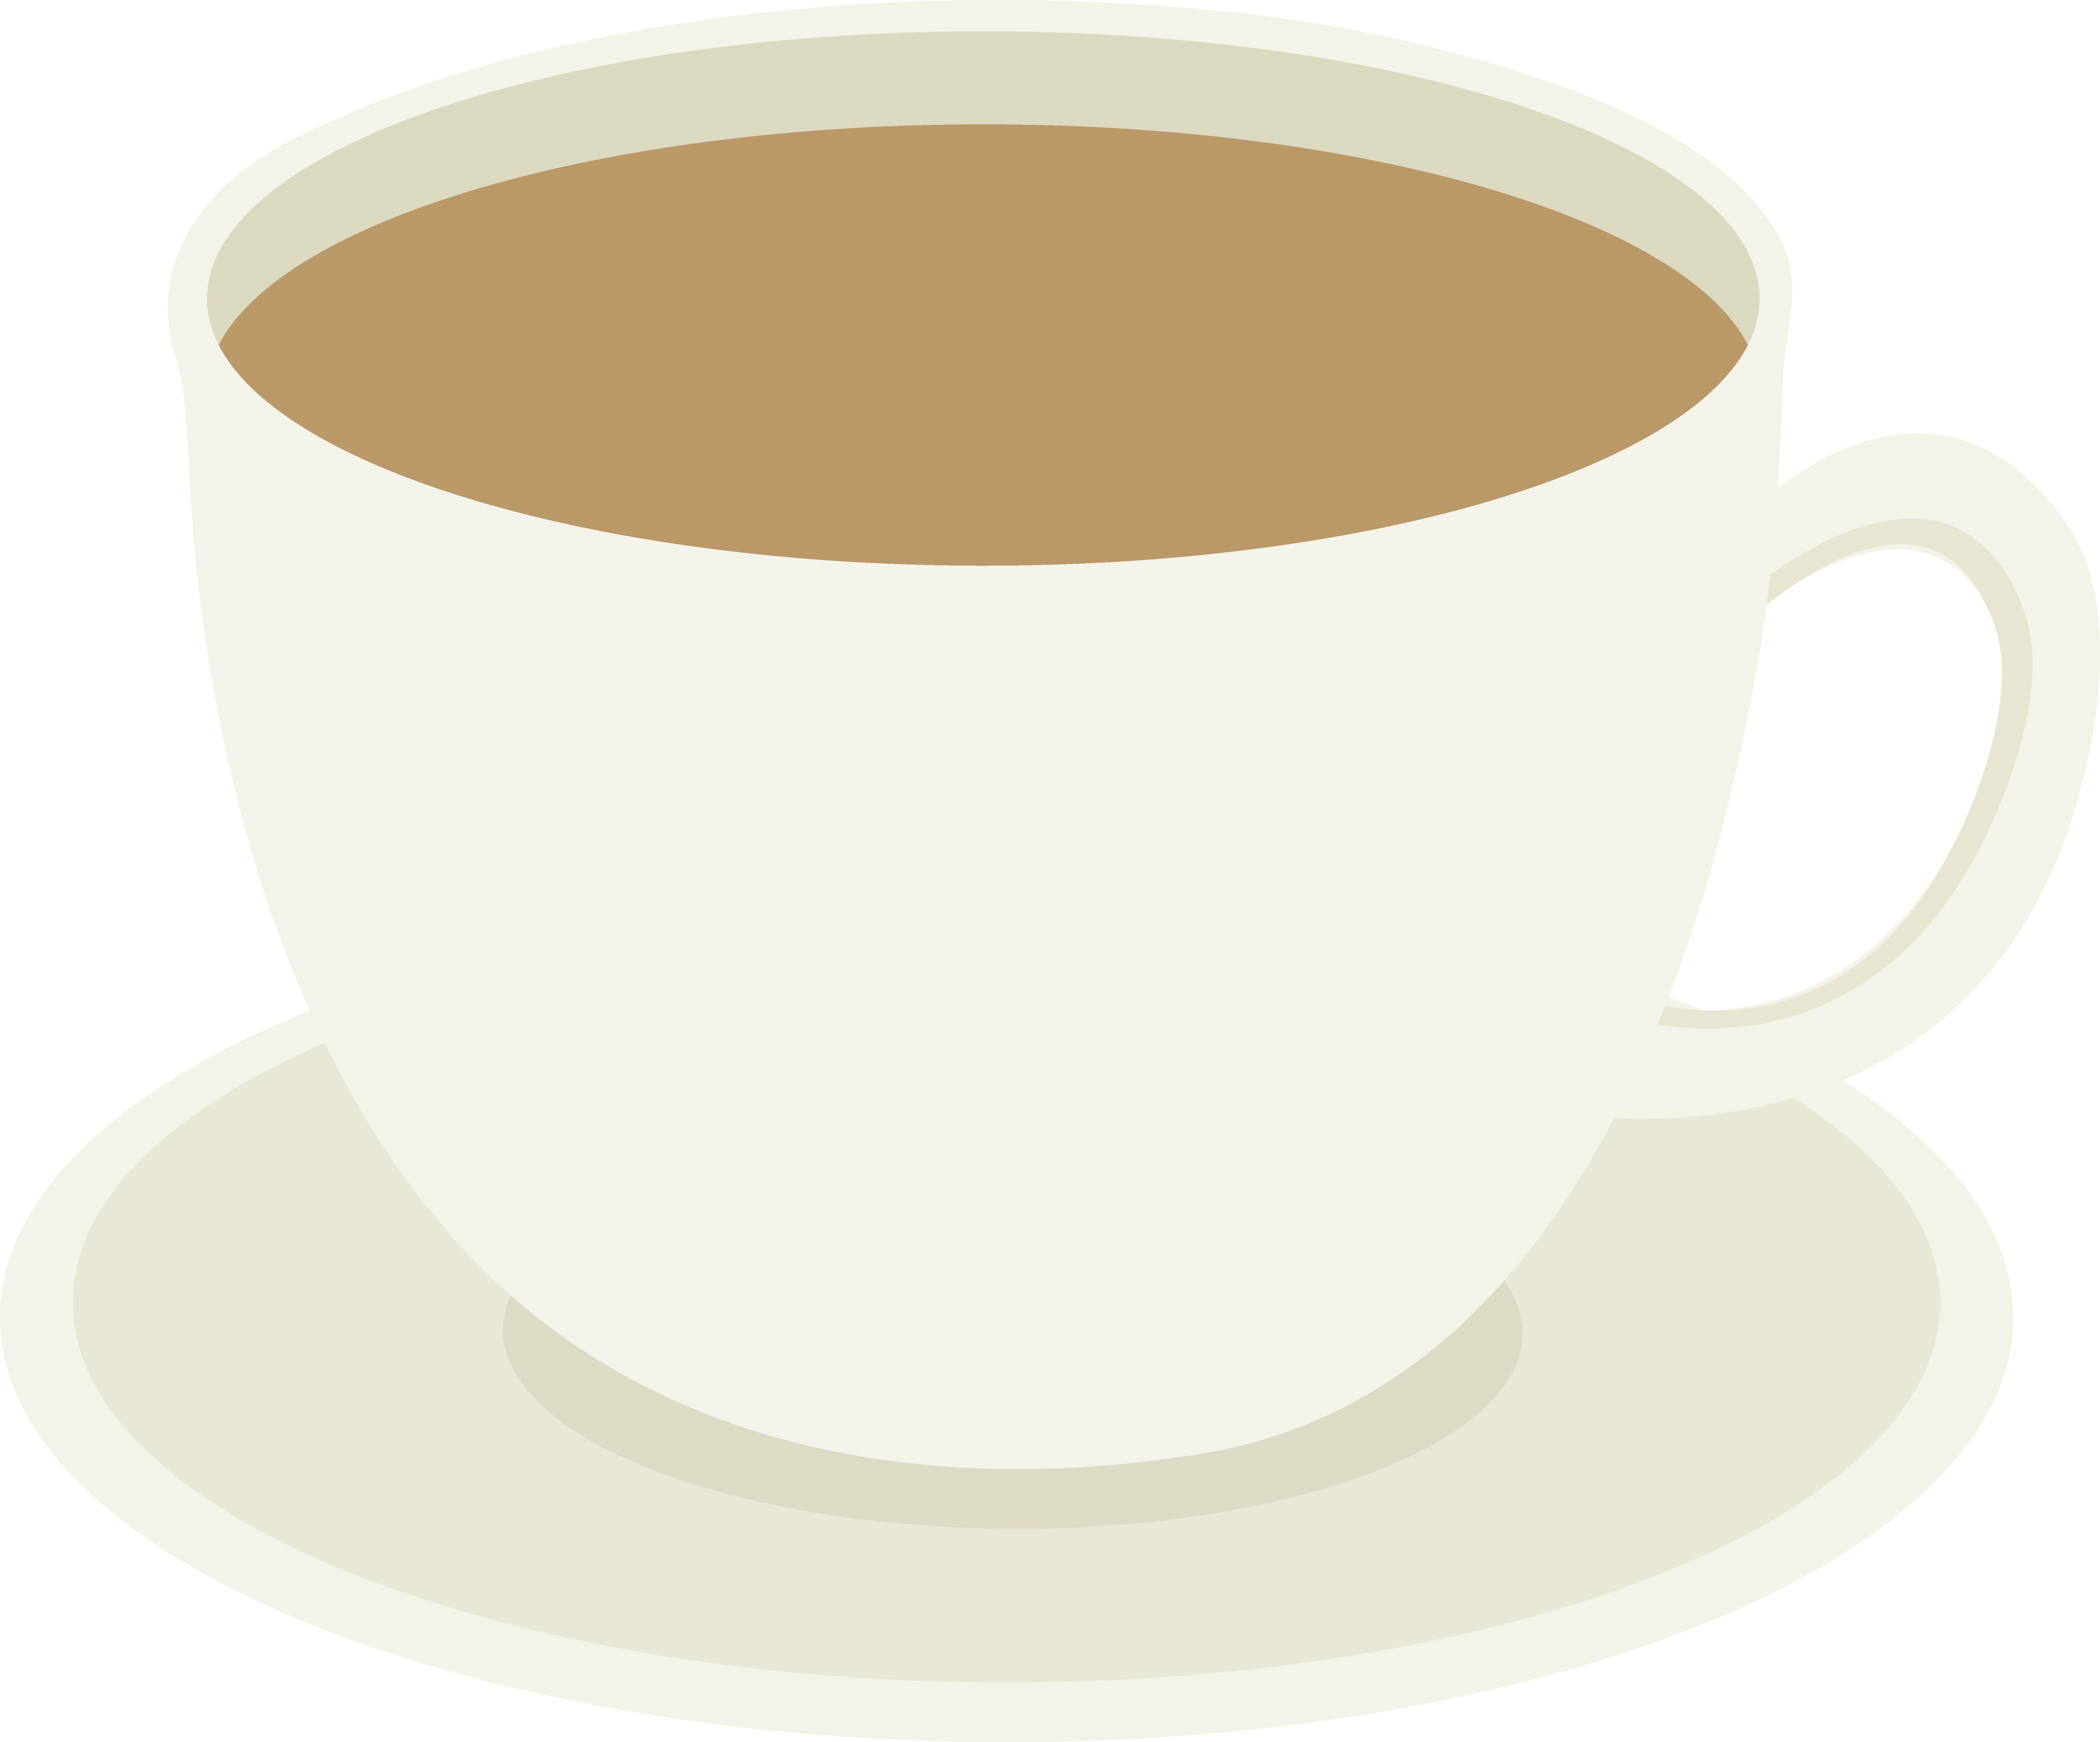 Cup of Coffee on Plate - Free Clip Art